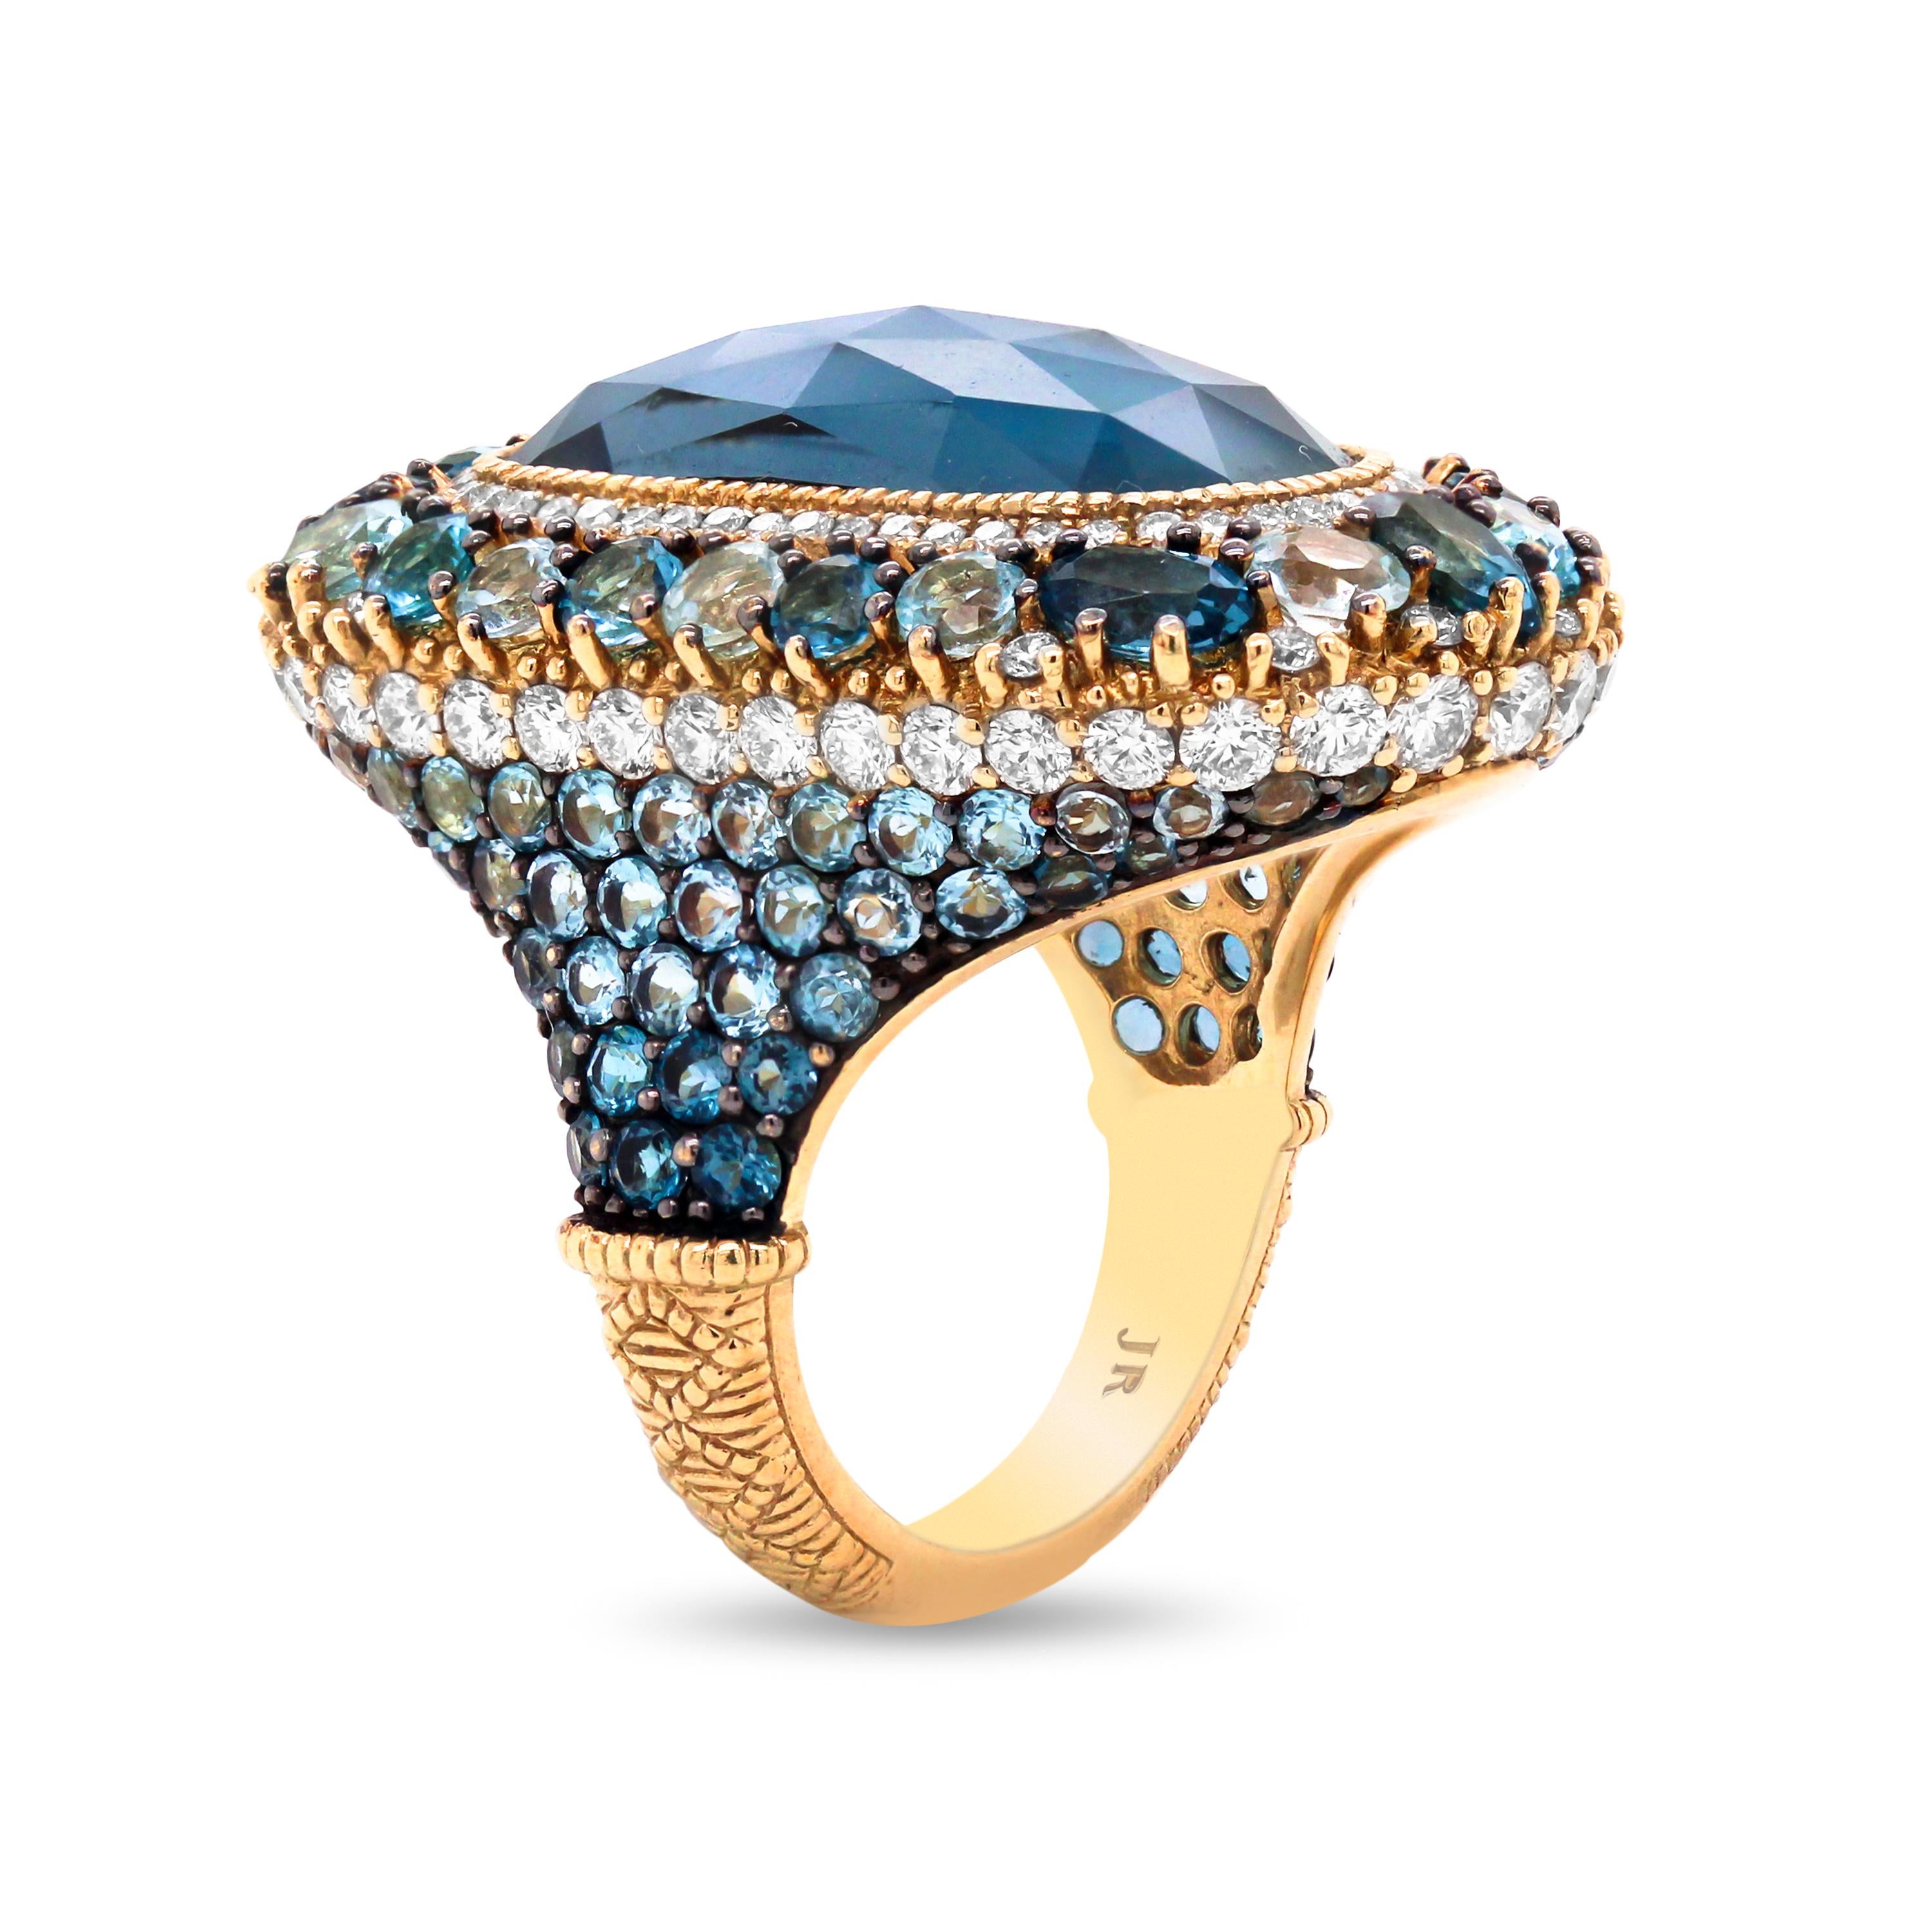 Judith Ripka Shaded Blue Sapphires Diamond Blue Topaz 18K Gold Cocktail Ring

This unique and extravagant ring features shaded blue sapphires with light blues to darker blues leading to a section of diamonds. The face of the ring has round and oval